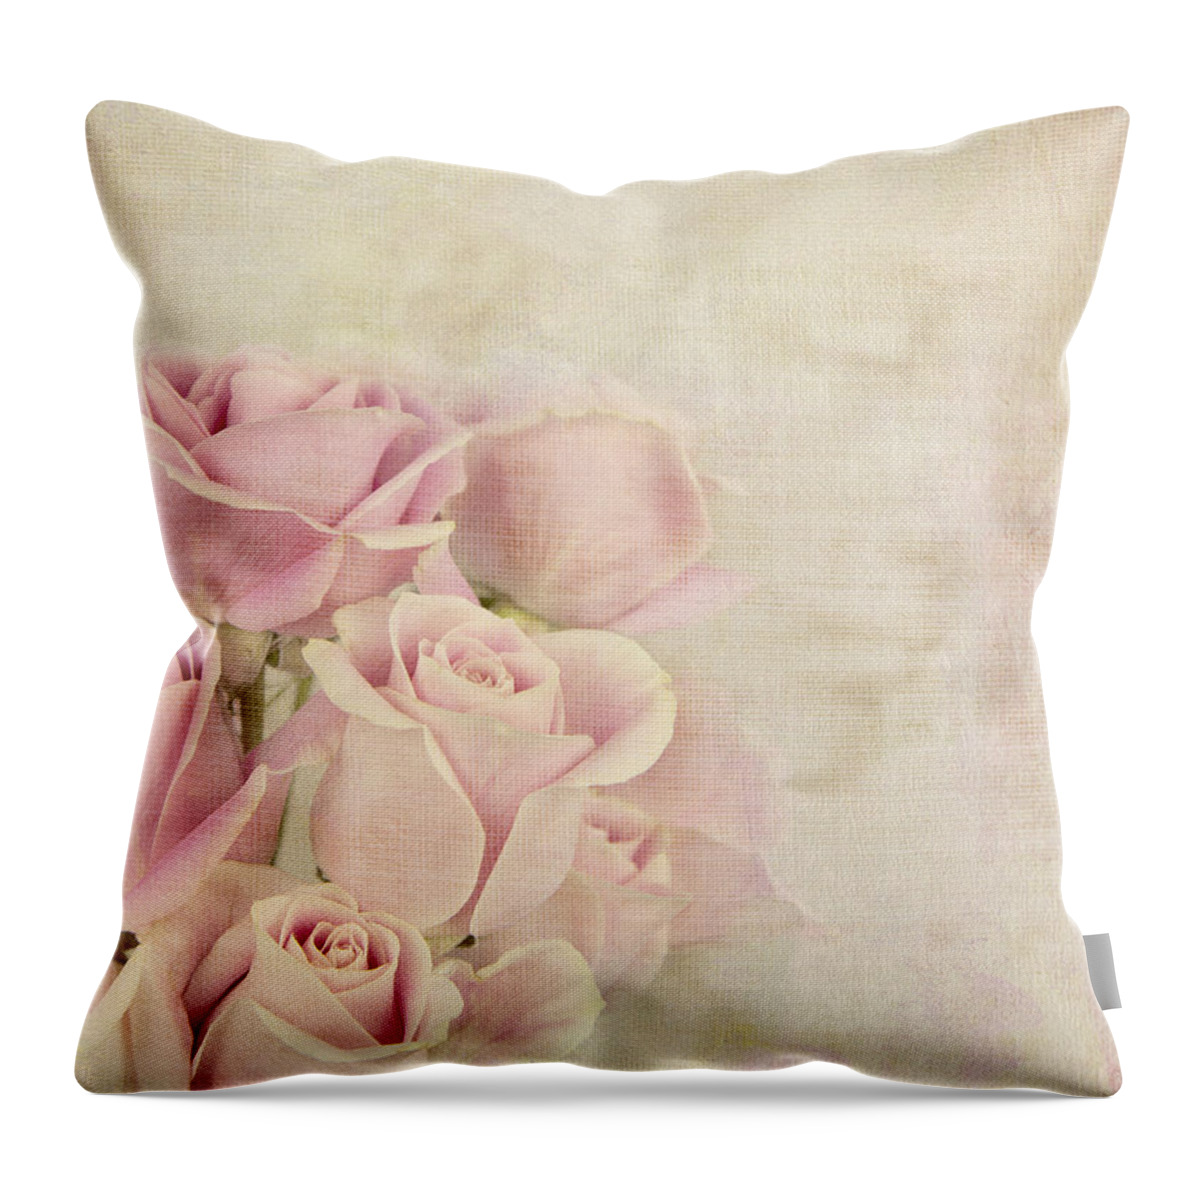 Rose Throw Pillow featuring the photograph Love Waits by Theresa Tahara